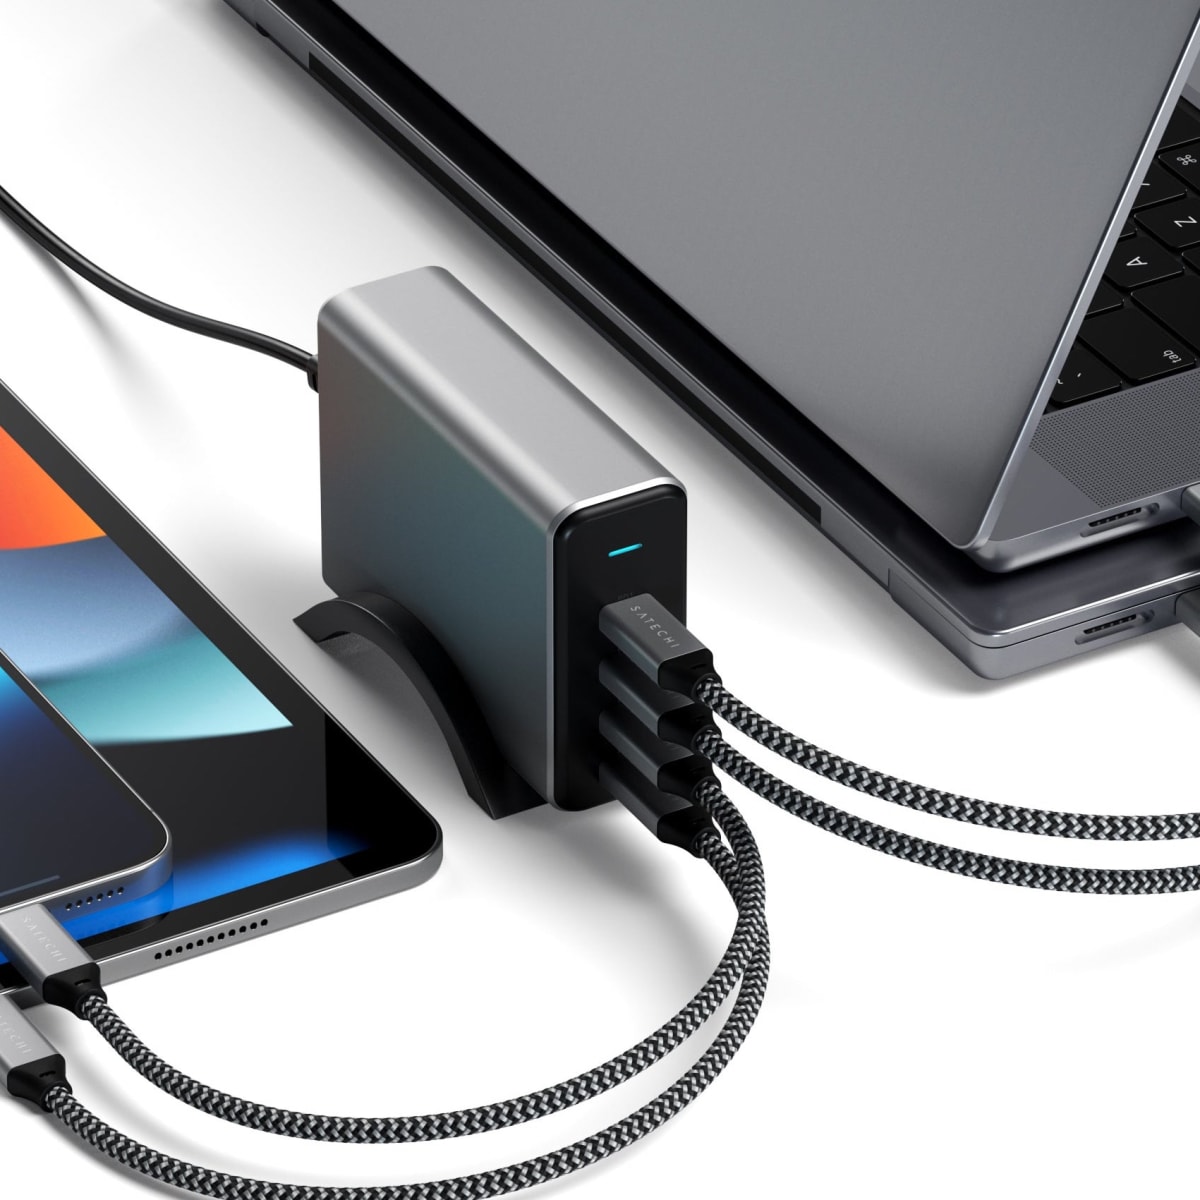 Satechi's new USB-C charger packs 165W of power - Acquire